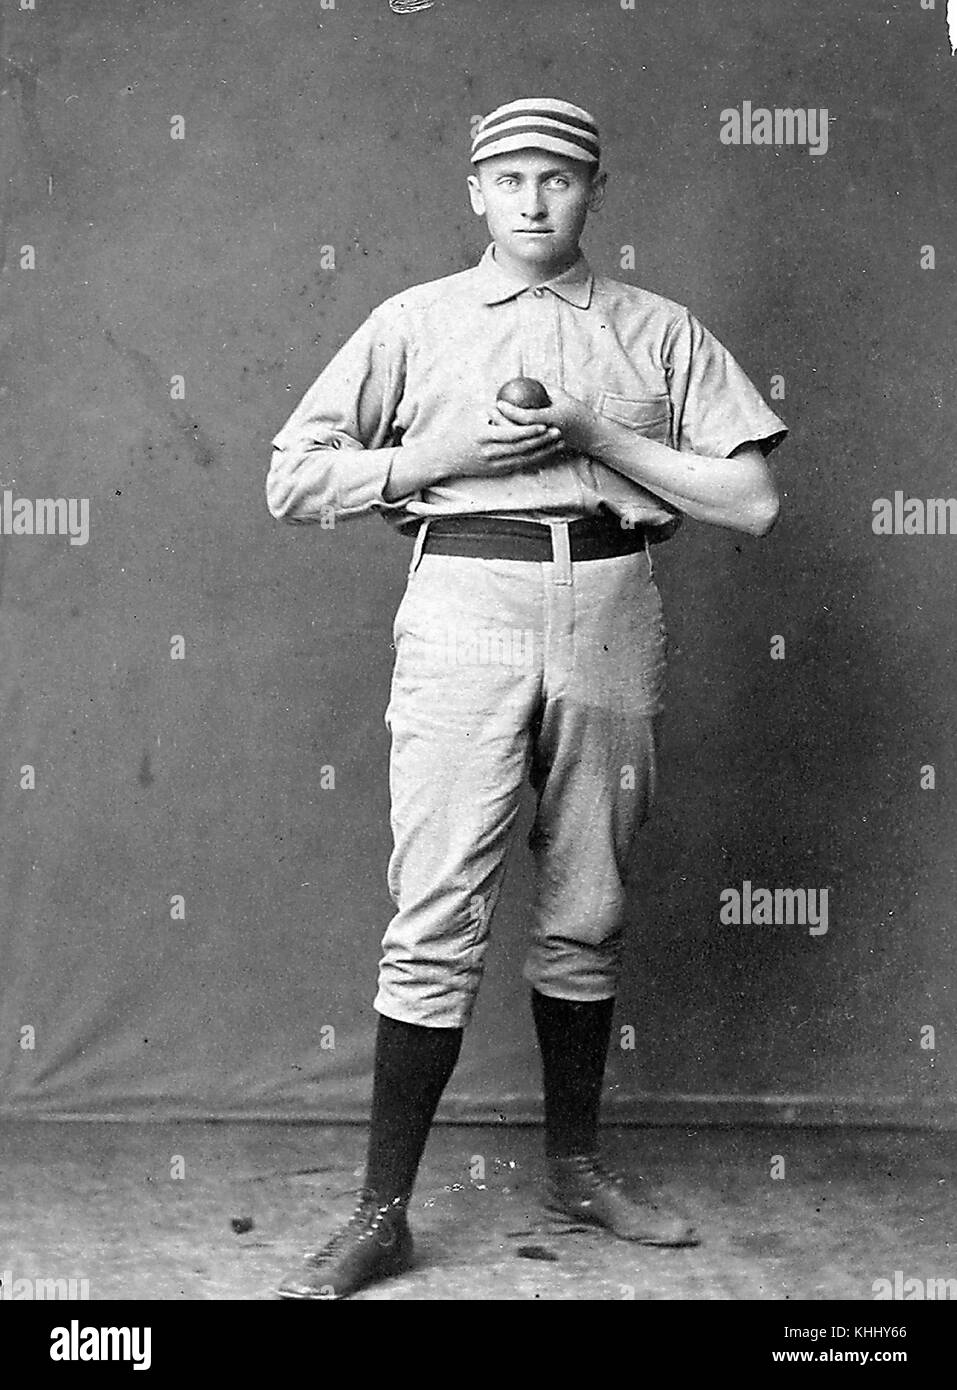 Portrait of Dan Casey, who played in Major League Baseball principally as a pitcher, over parts of seven seasons for four major league clubs, primarily the Philadelphia Quakers, in uniform, holding a ball, photograph by GE Gray, Boston, Massachusets, 1900. From the New York Public Library. Stock Photo